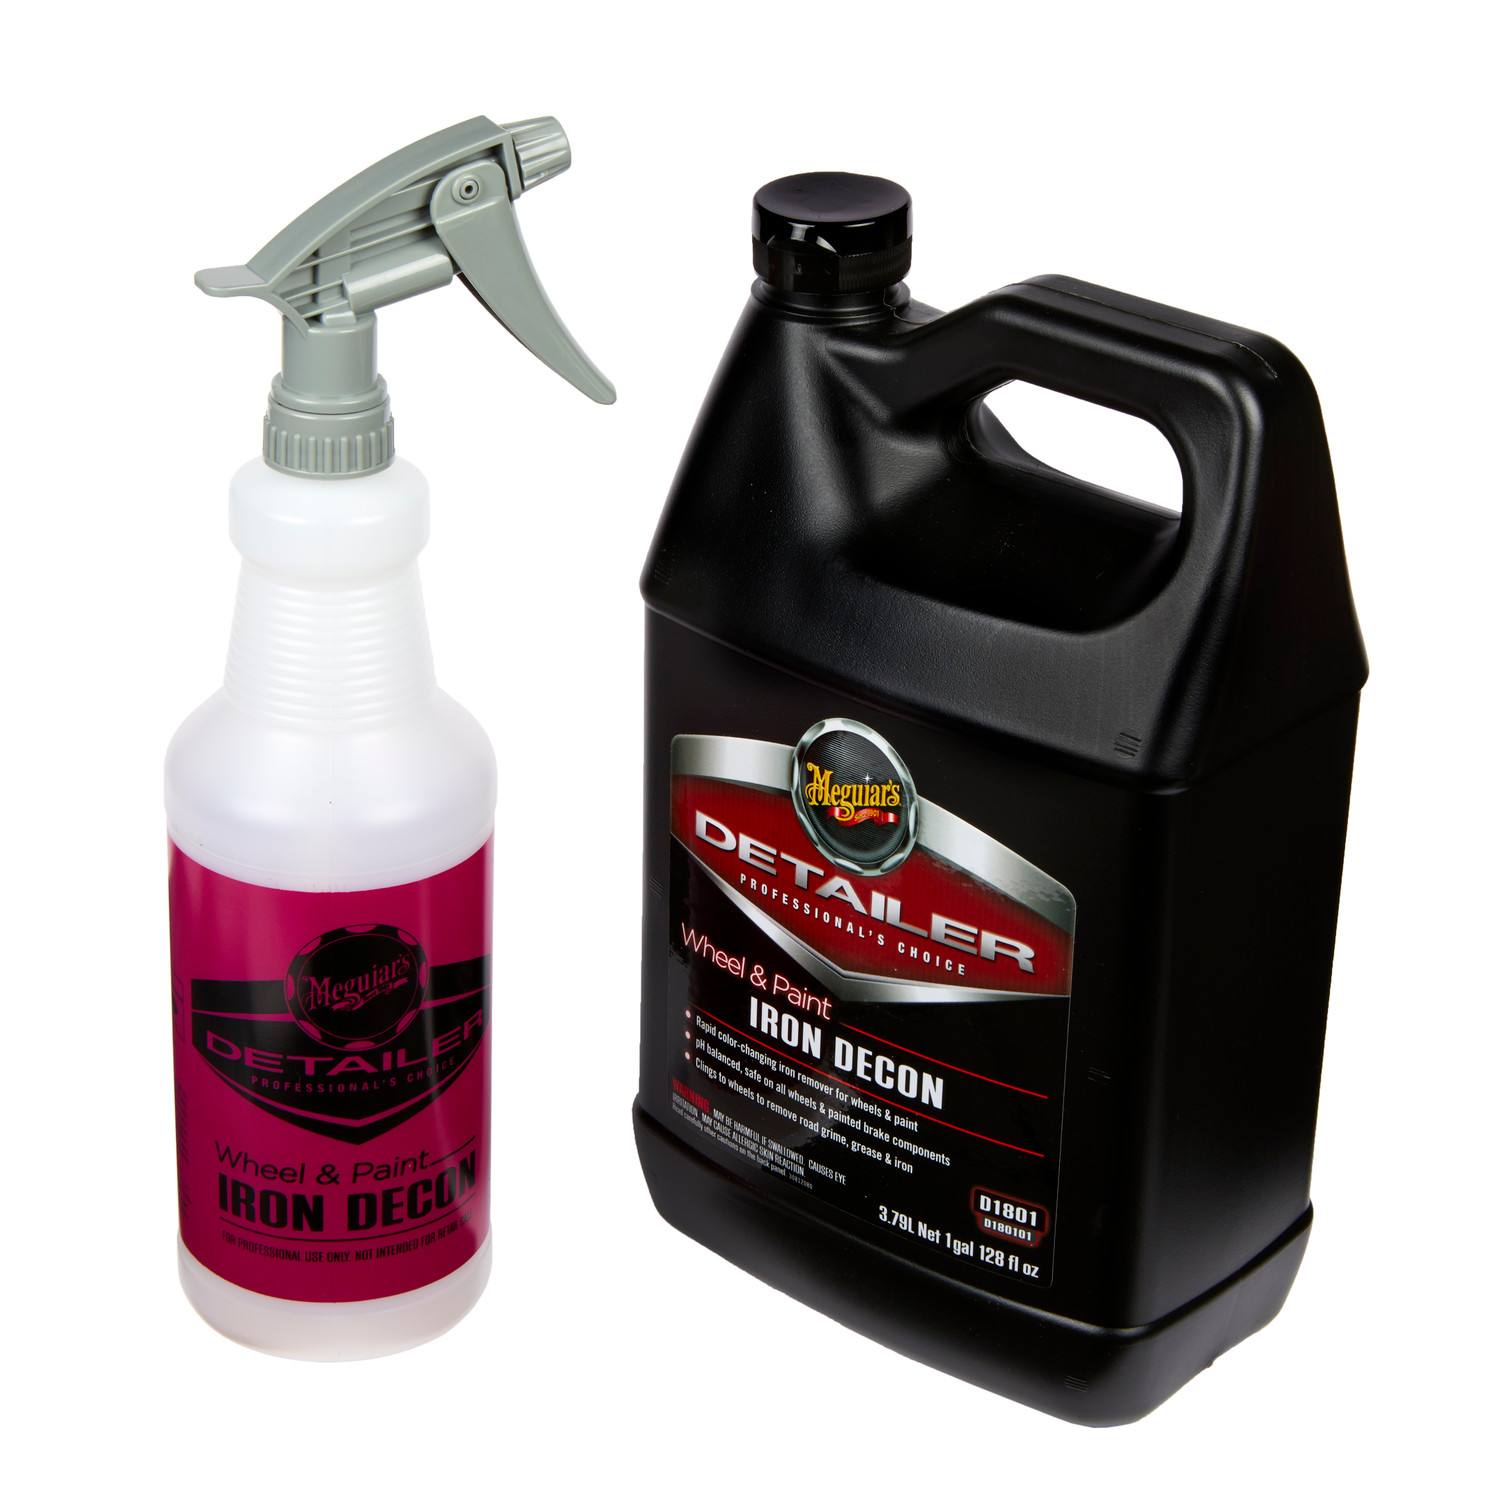 Fallout - Acid Free Iron Remover for Rims and Body Panels 1 Gallon